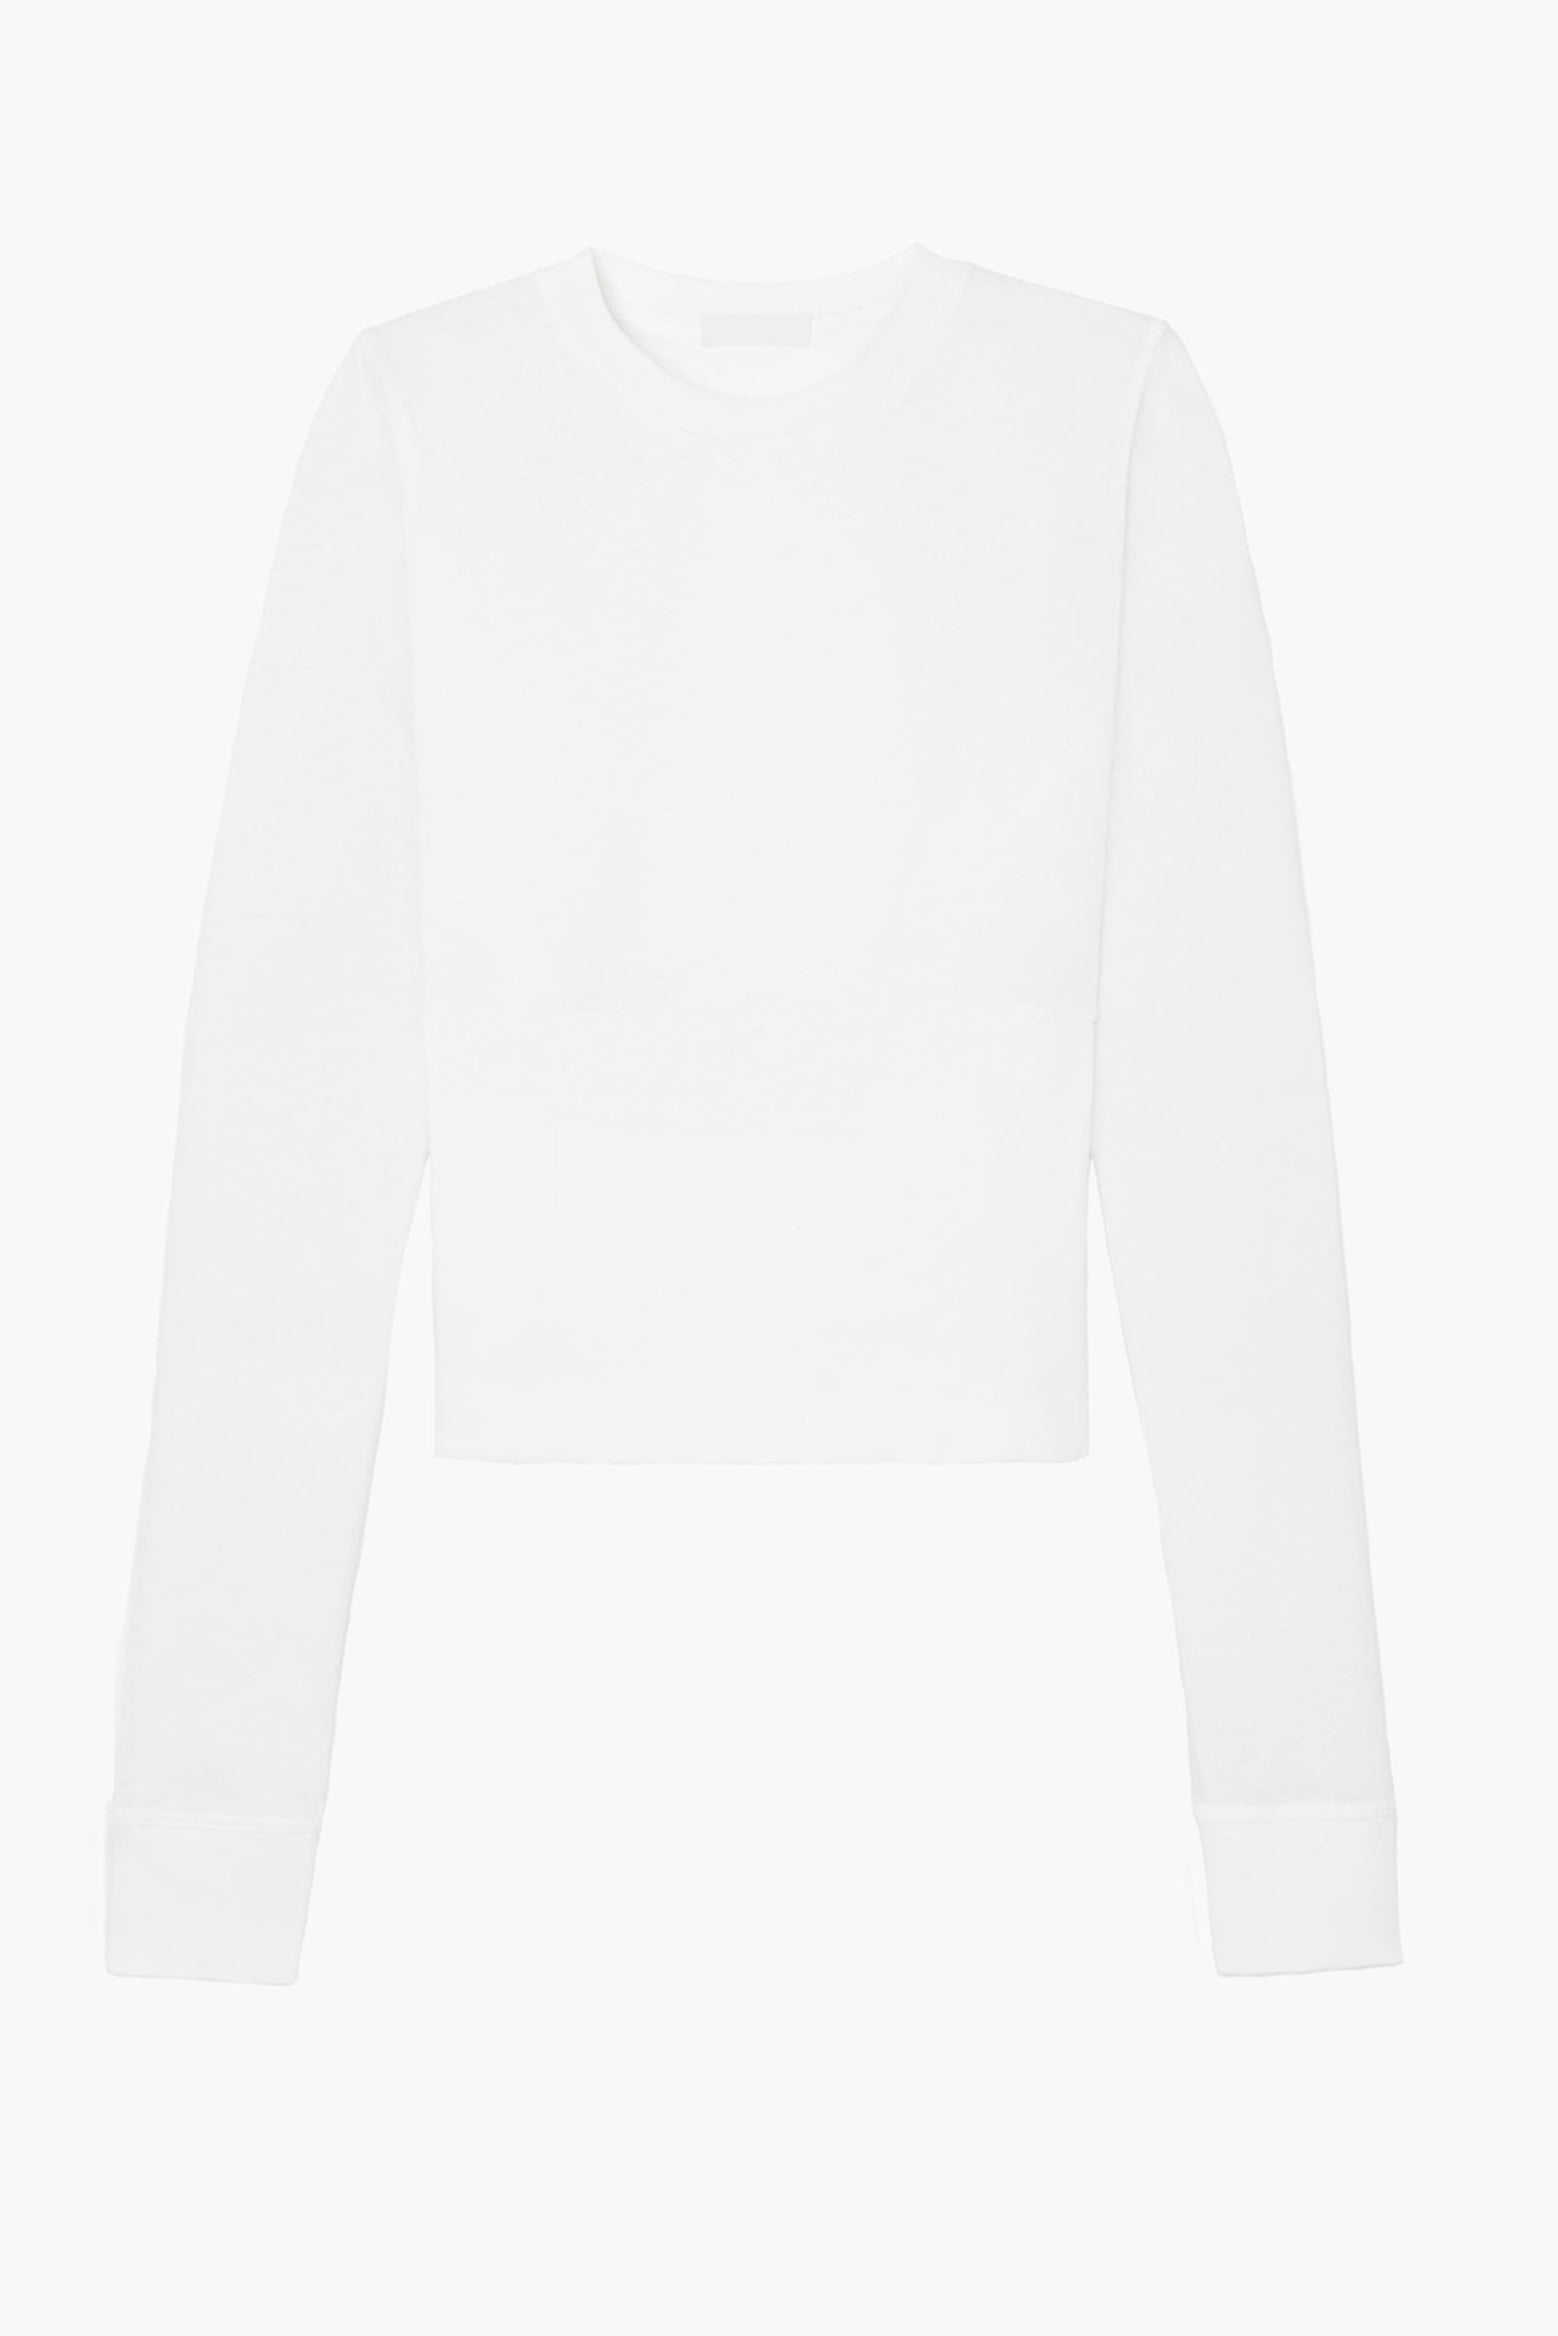 The Wardrobe NYC Fitted Long Sleeve Tee in White available at The New Trend Australia